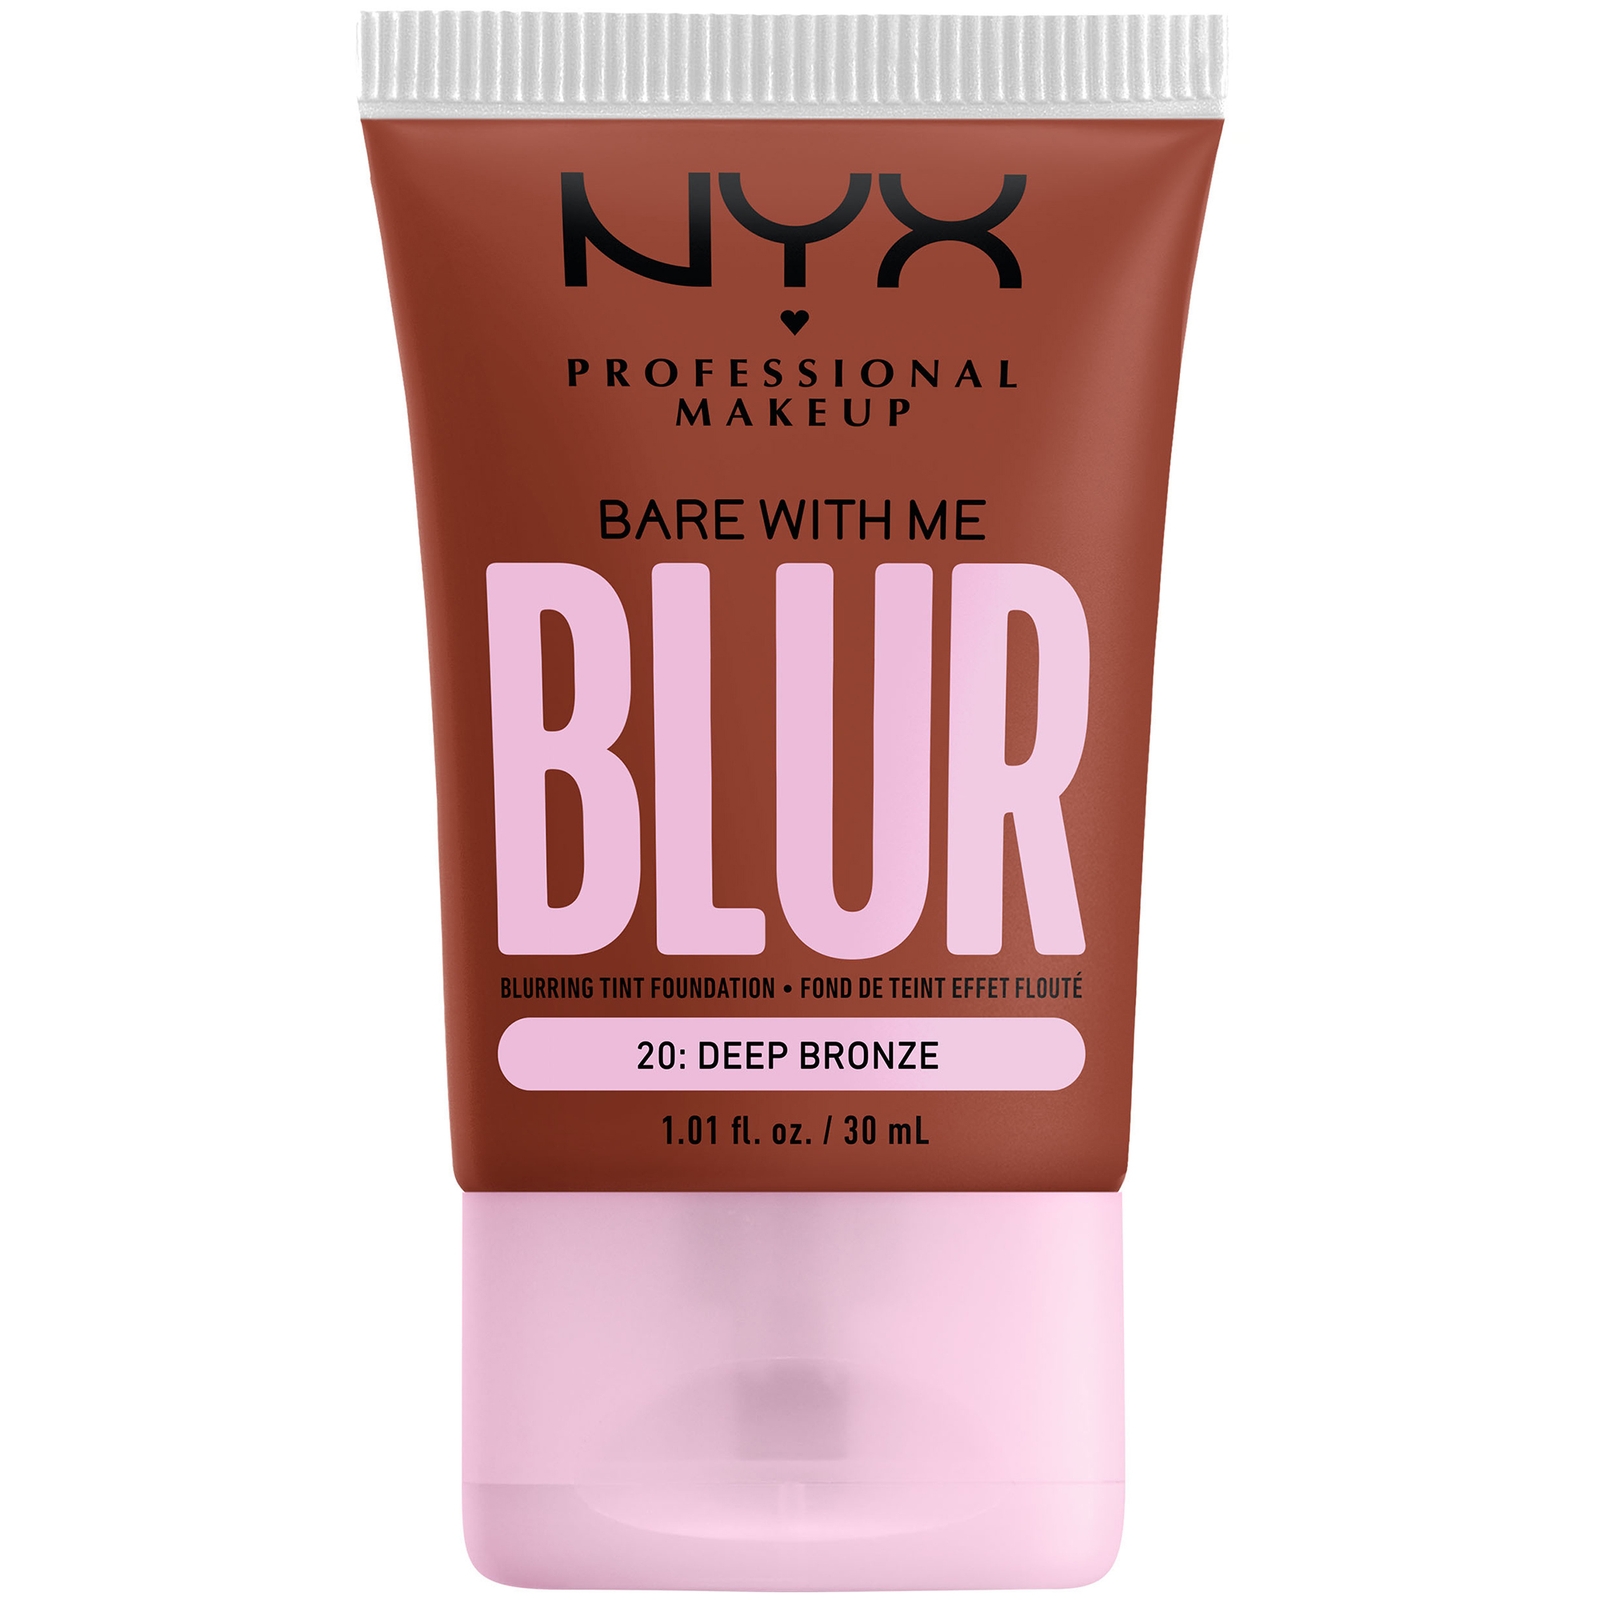 Nyx Professional Makeup Bare With Me Blur Tint Foundation 30ml (varios Shades) - Deep Bronze In White